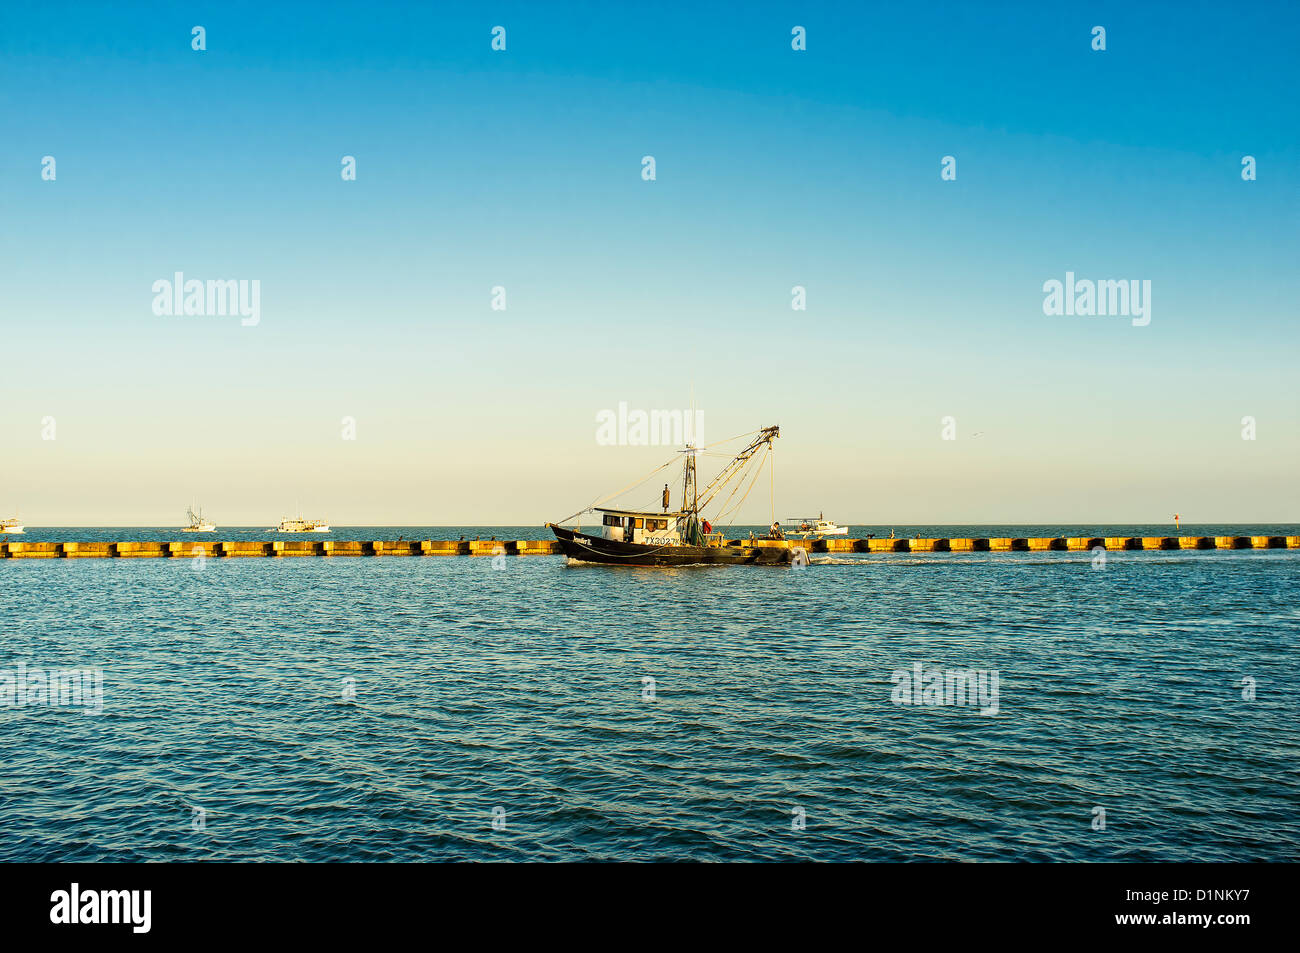 Fishing boats returning at the end of the day, Gulf of Mexico, Texas, USA Stock Photo